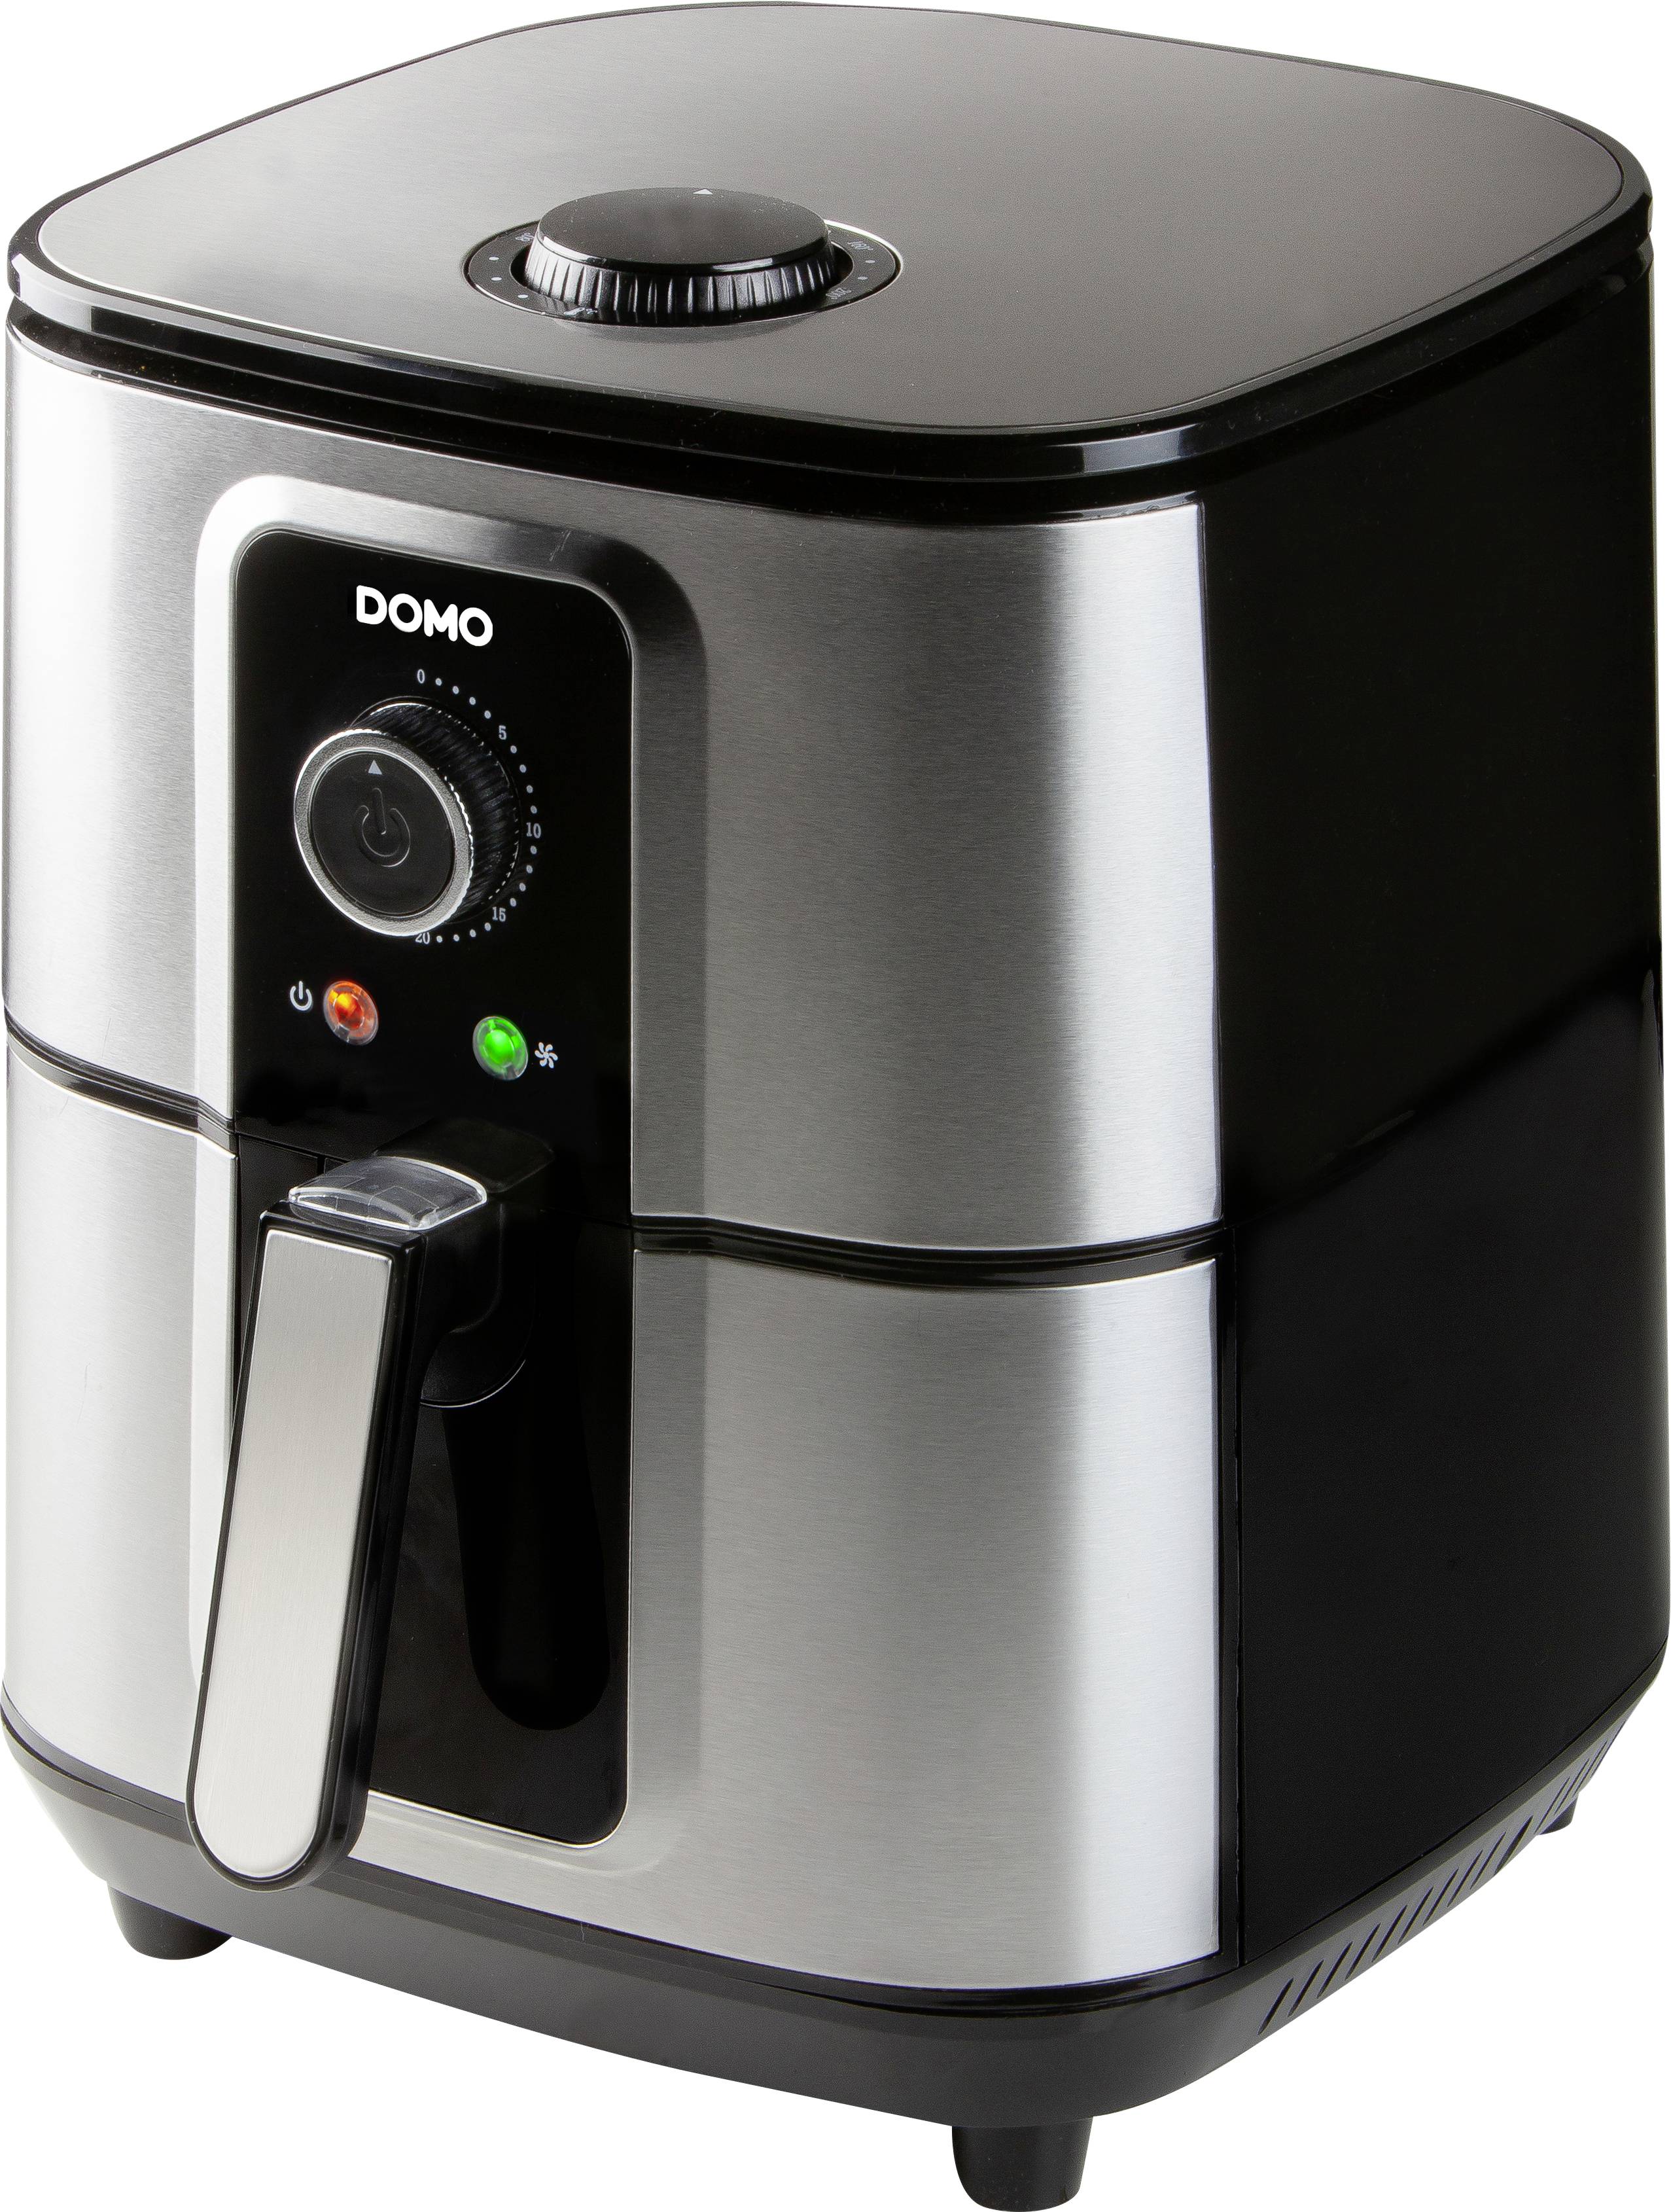 Voorstad fontein Verfijning DOMO DO536FR Airfryer Cool touch housing, Overheat protection, Timer  fuction, Indicator light Stainless steel, Black | Conrad.com